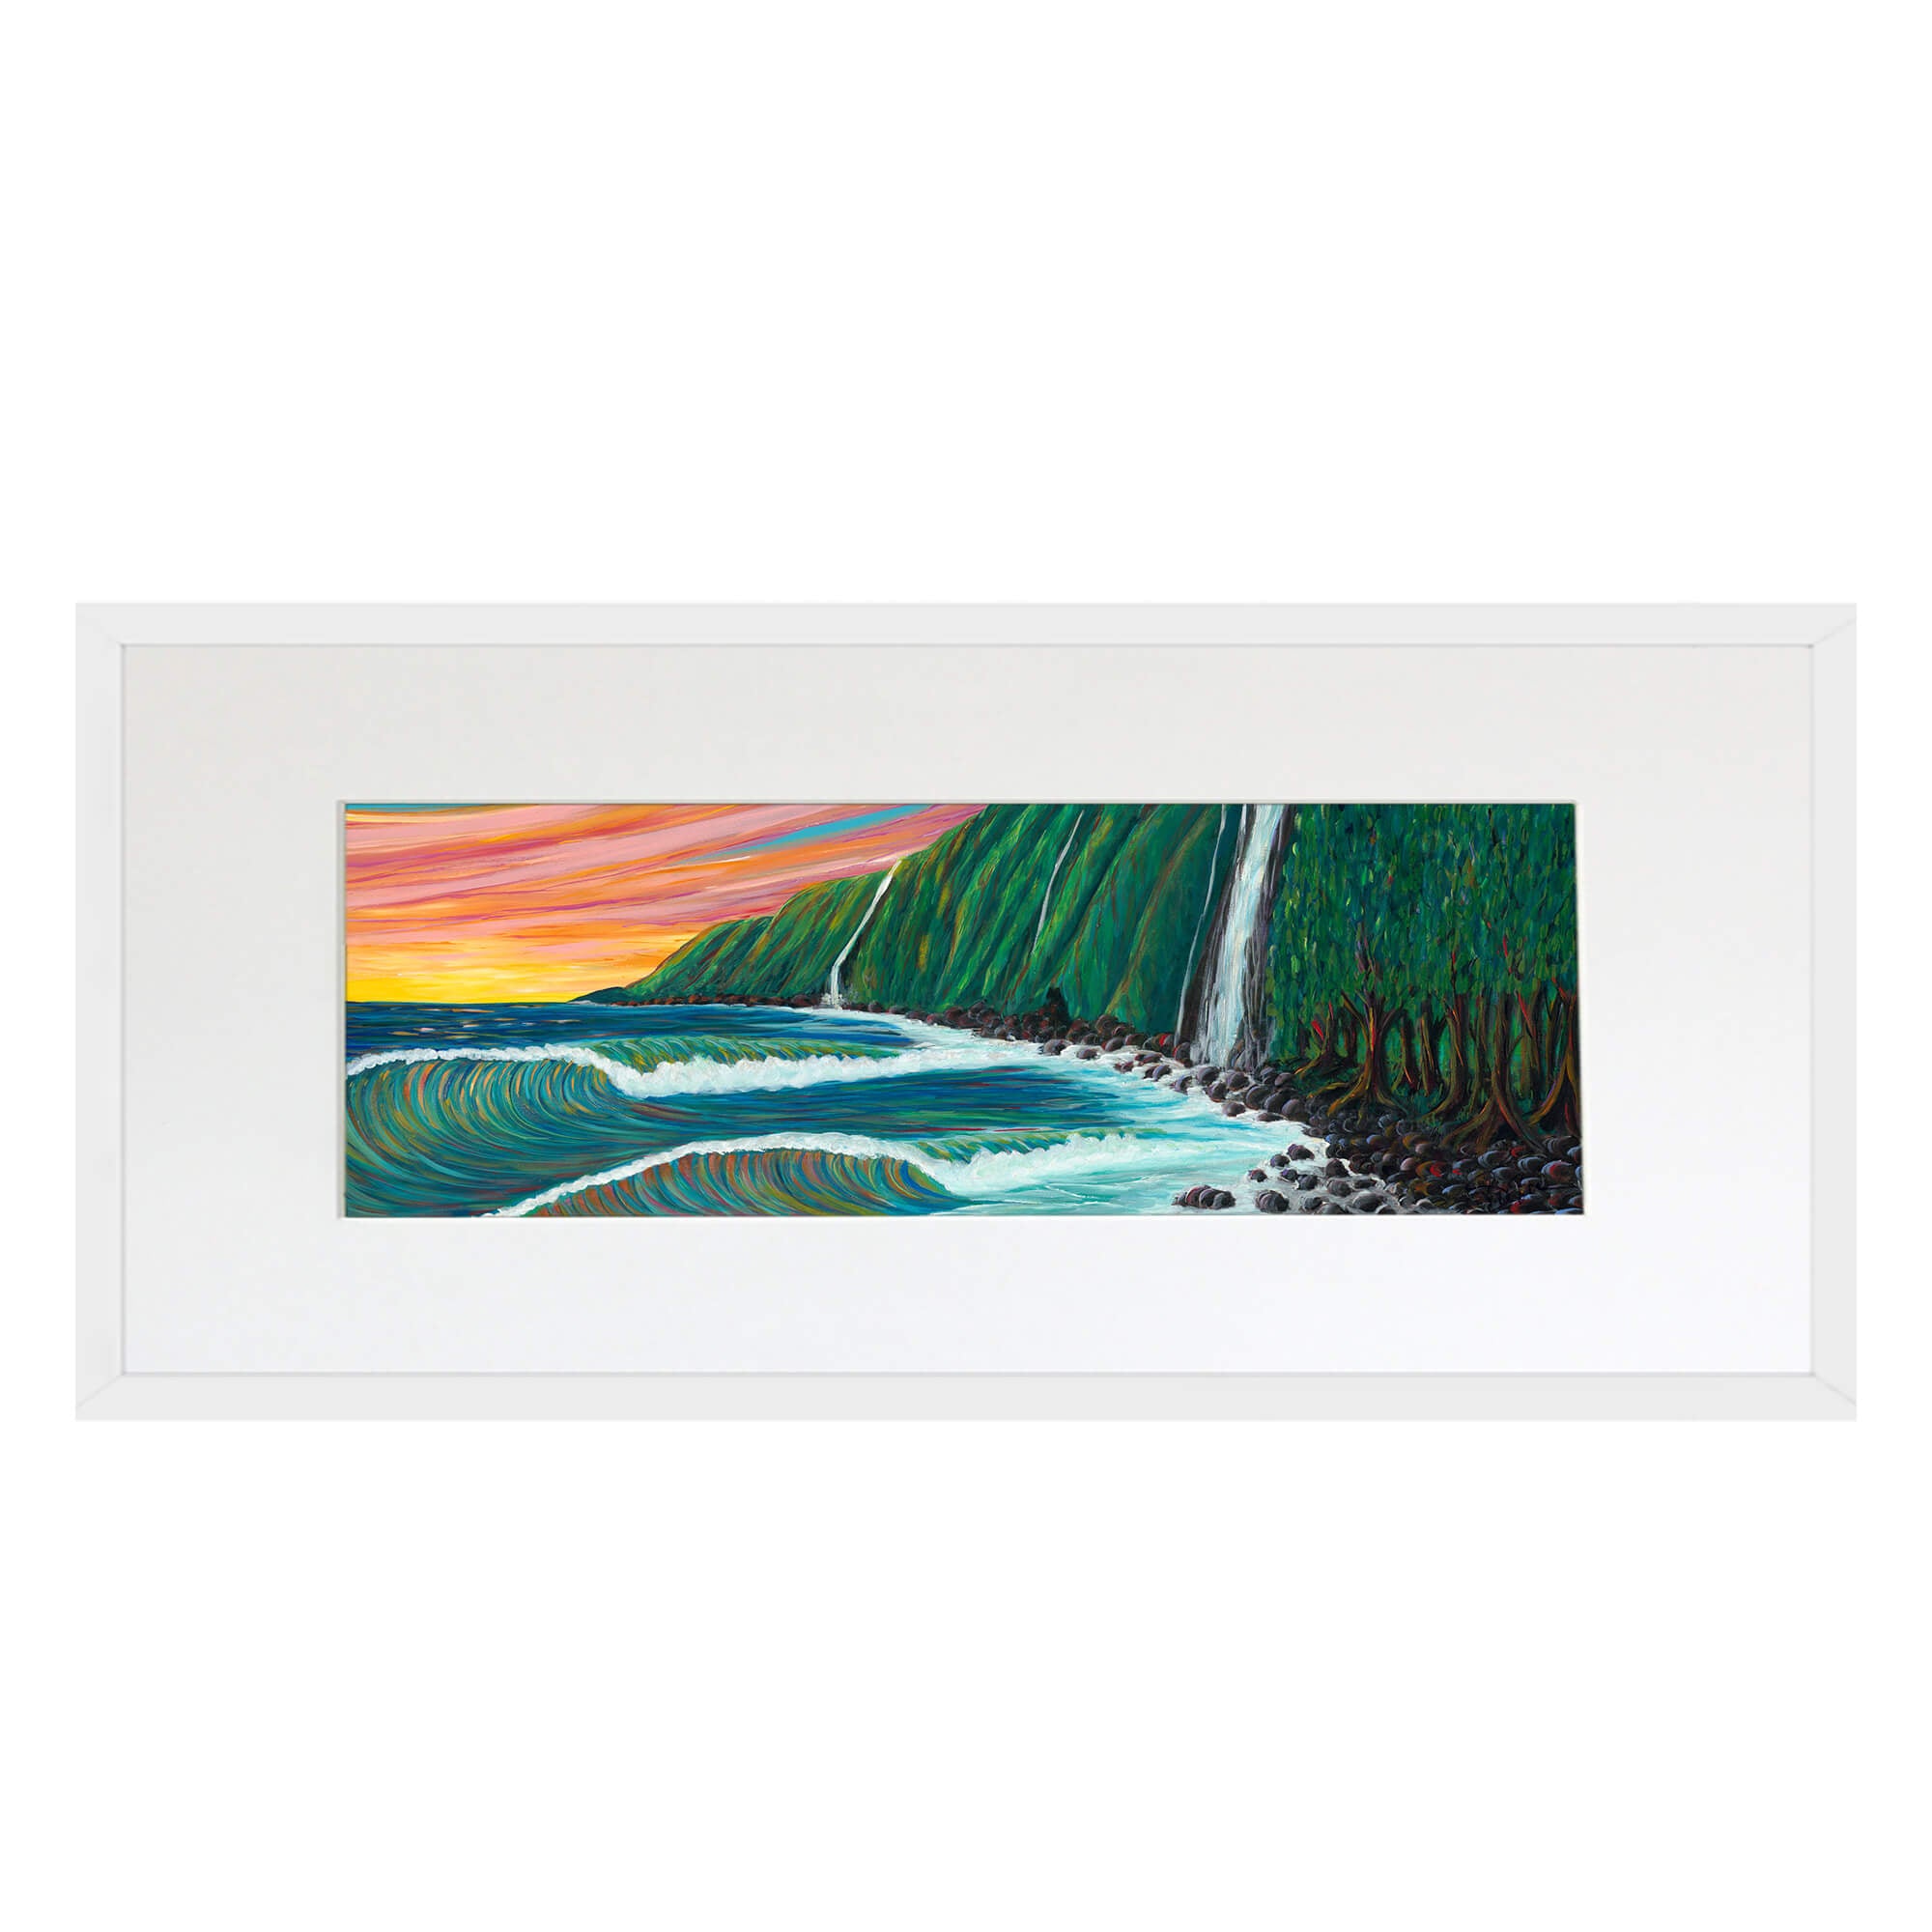 Matted art print with white frame showcasing a mountain  by hawaii artist Suzanne MacAdam